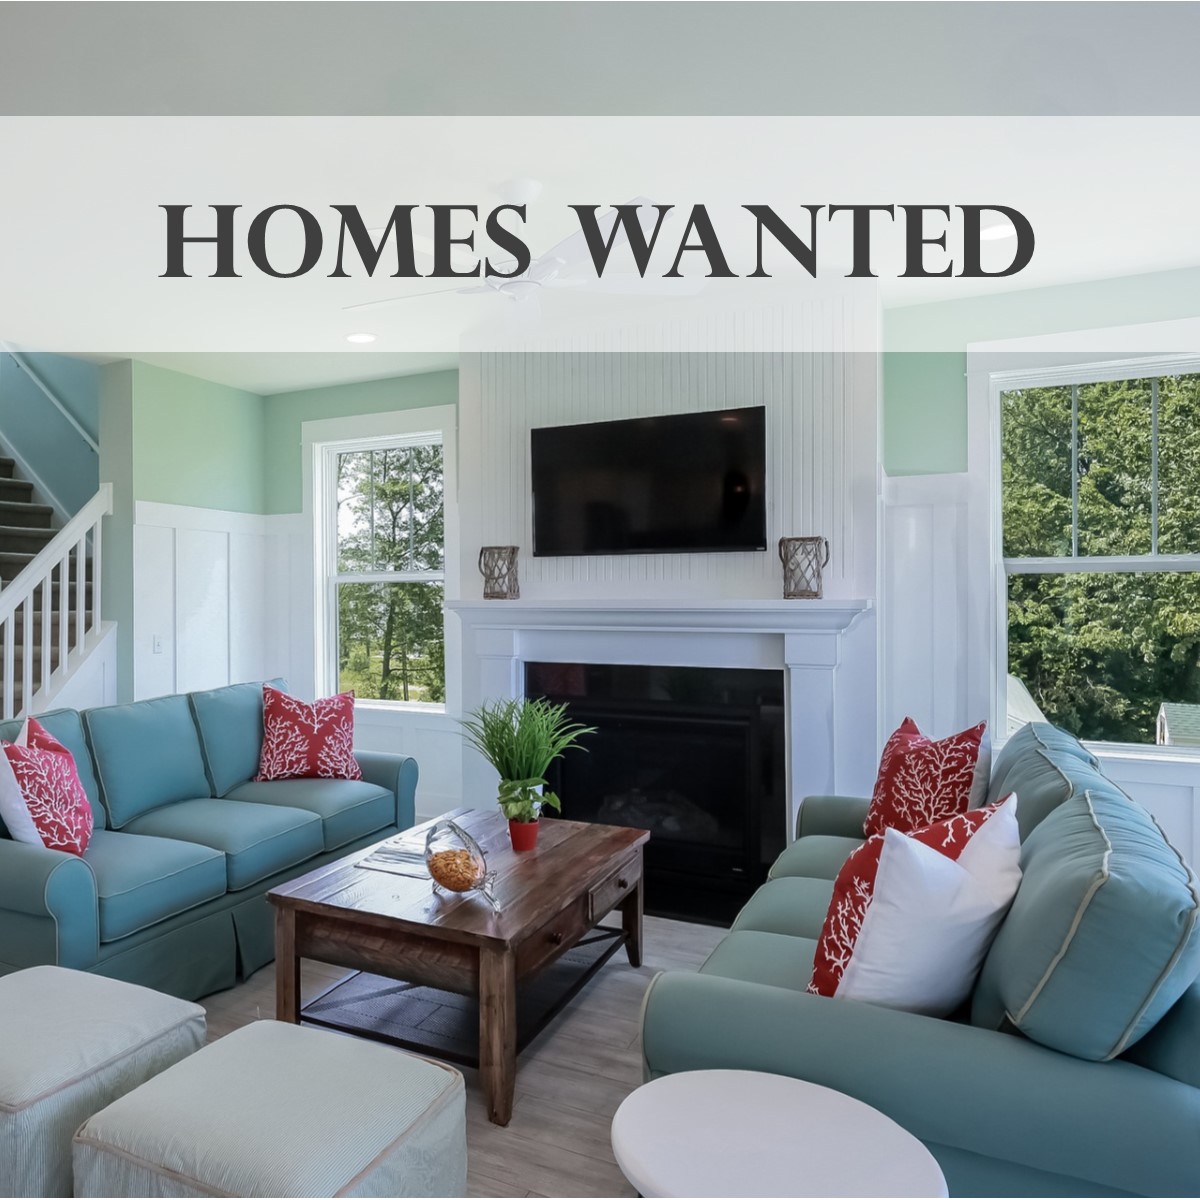 Maine Homes Wanted - maine homes for sale, maine real estate, maine realtors, fontaine family, fontaine family team